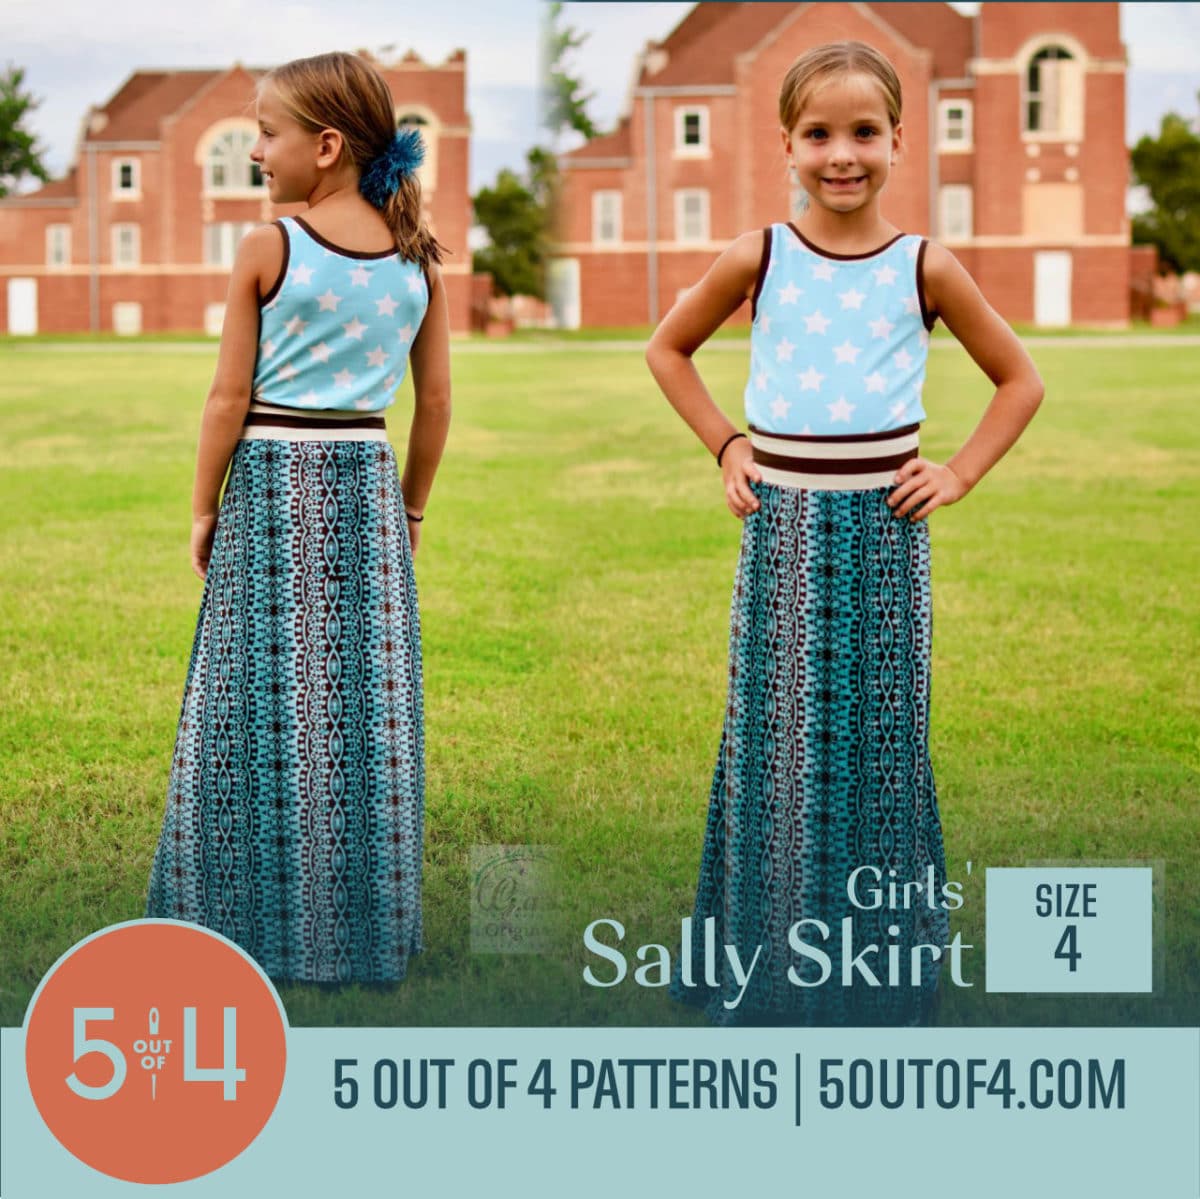 Girls' Sally Skirt - 5 out of 4 Patterns